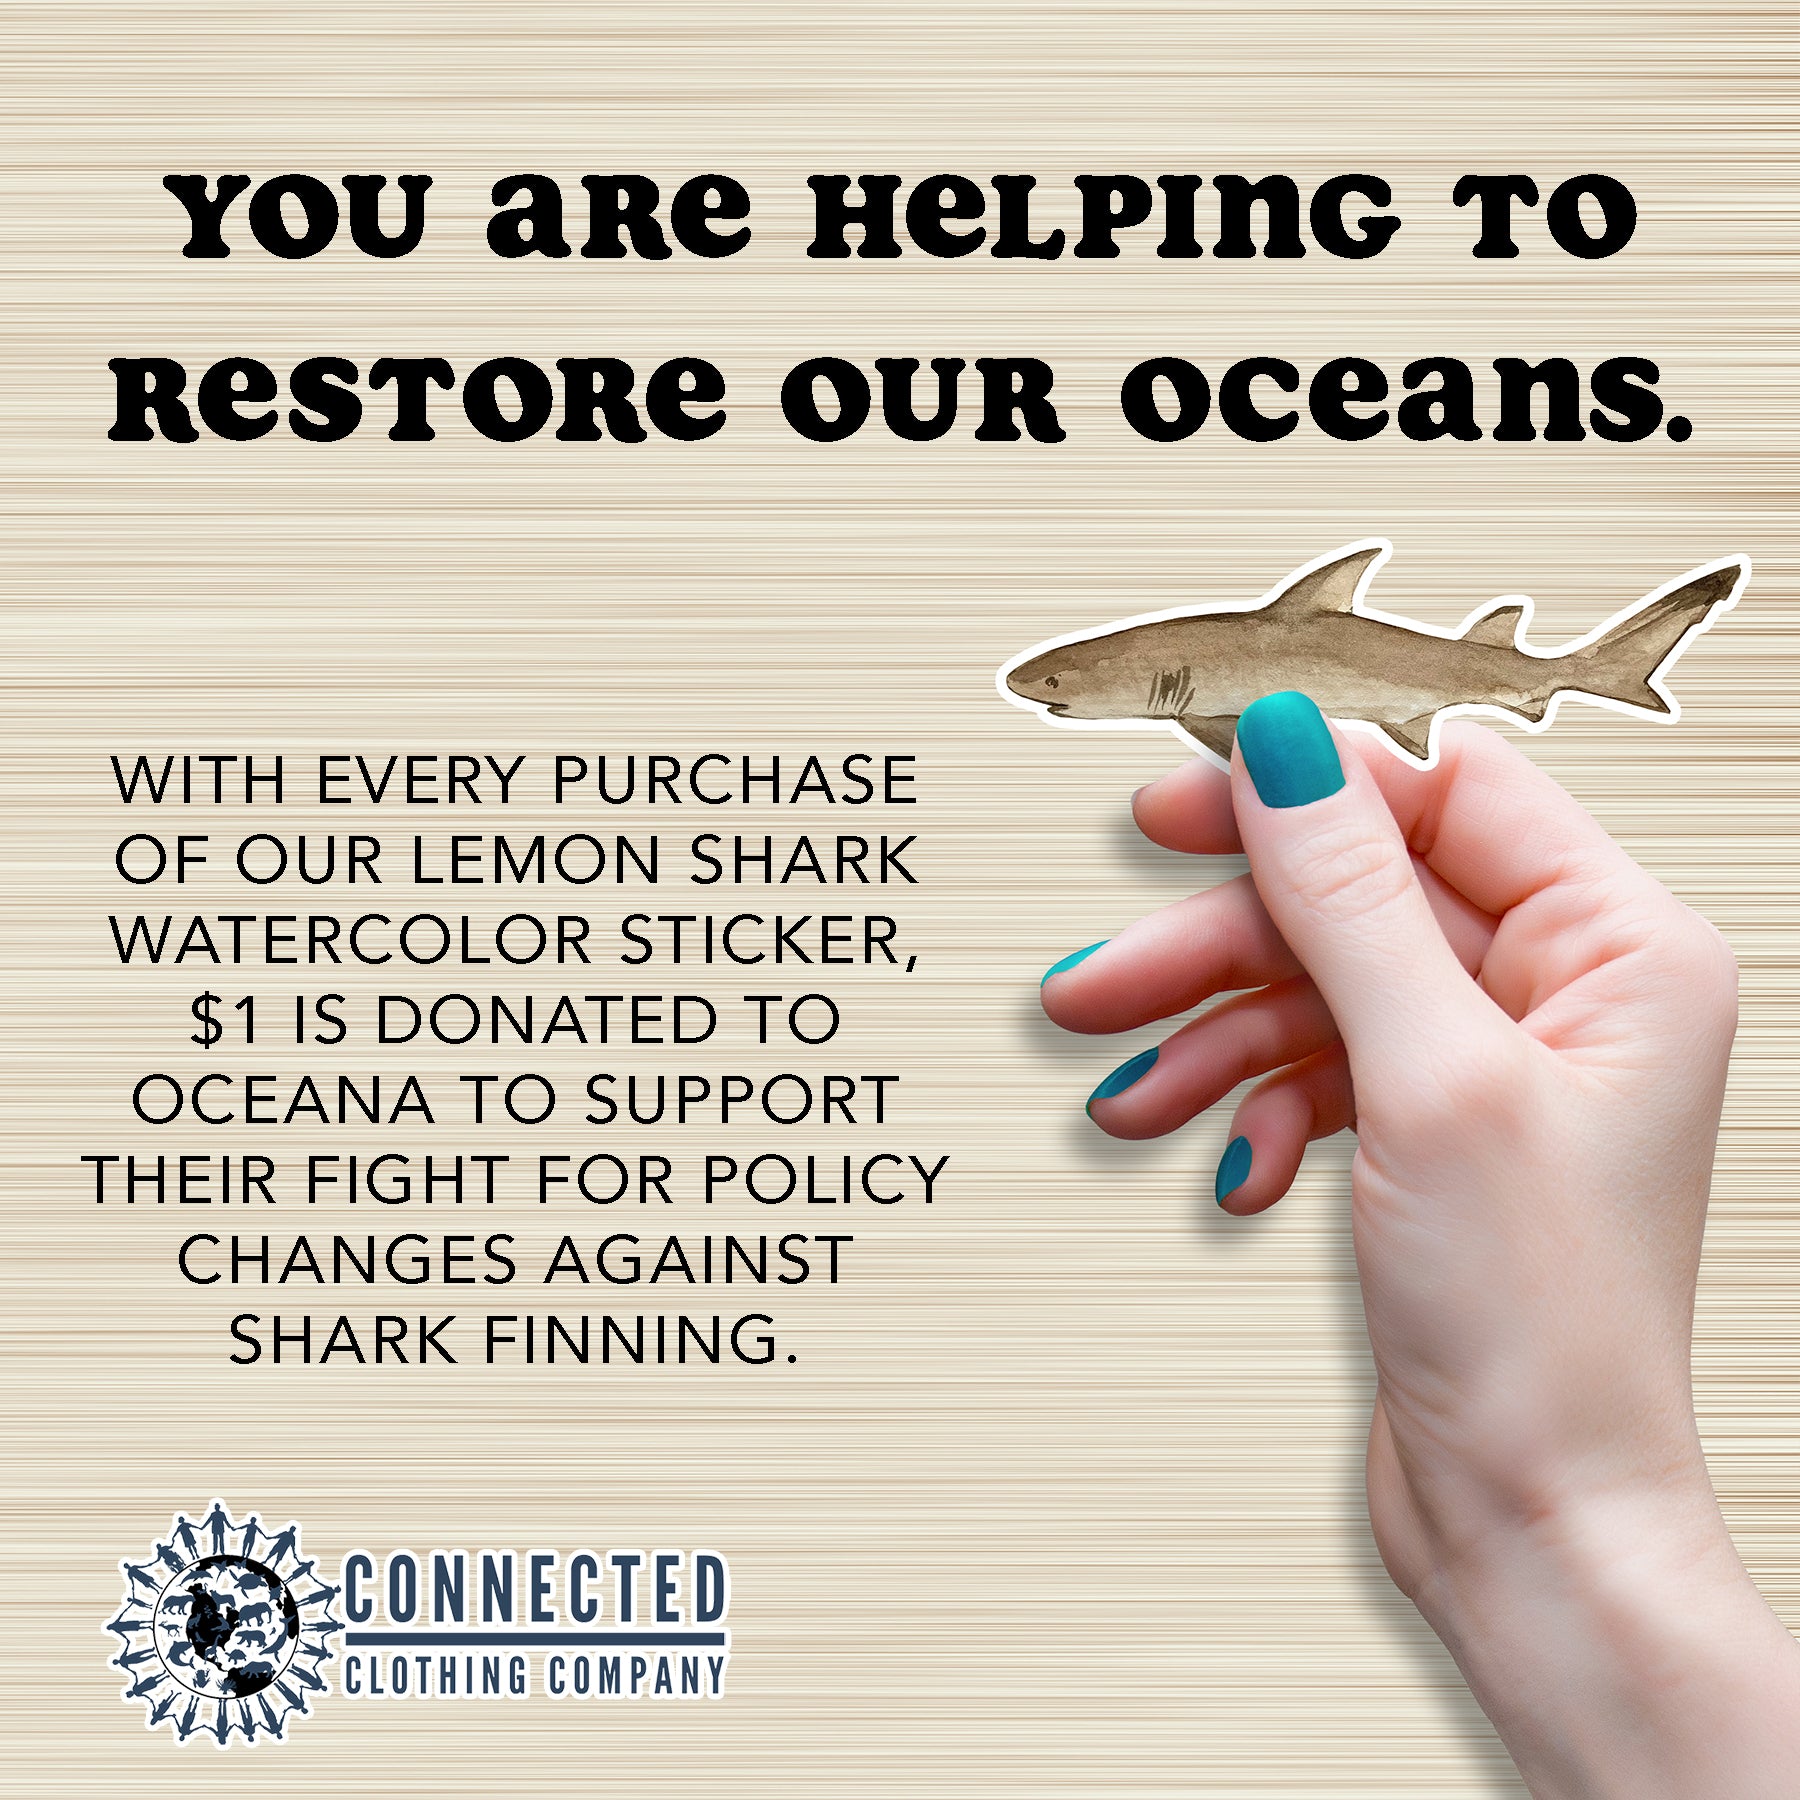 Hand Holding Lemon Shark Watercolor Sticker - "You are helping to restore our oceans. With every purchase of our lemon shark watercolor sticker, $1 is donated to oceana to support their fight for policy changes against shark finning." - sweetsherriloudesigns - Ethical and Sustainable Apparel - portion of profits donated to shark conservation